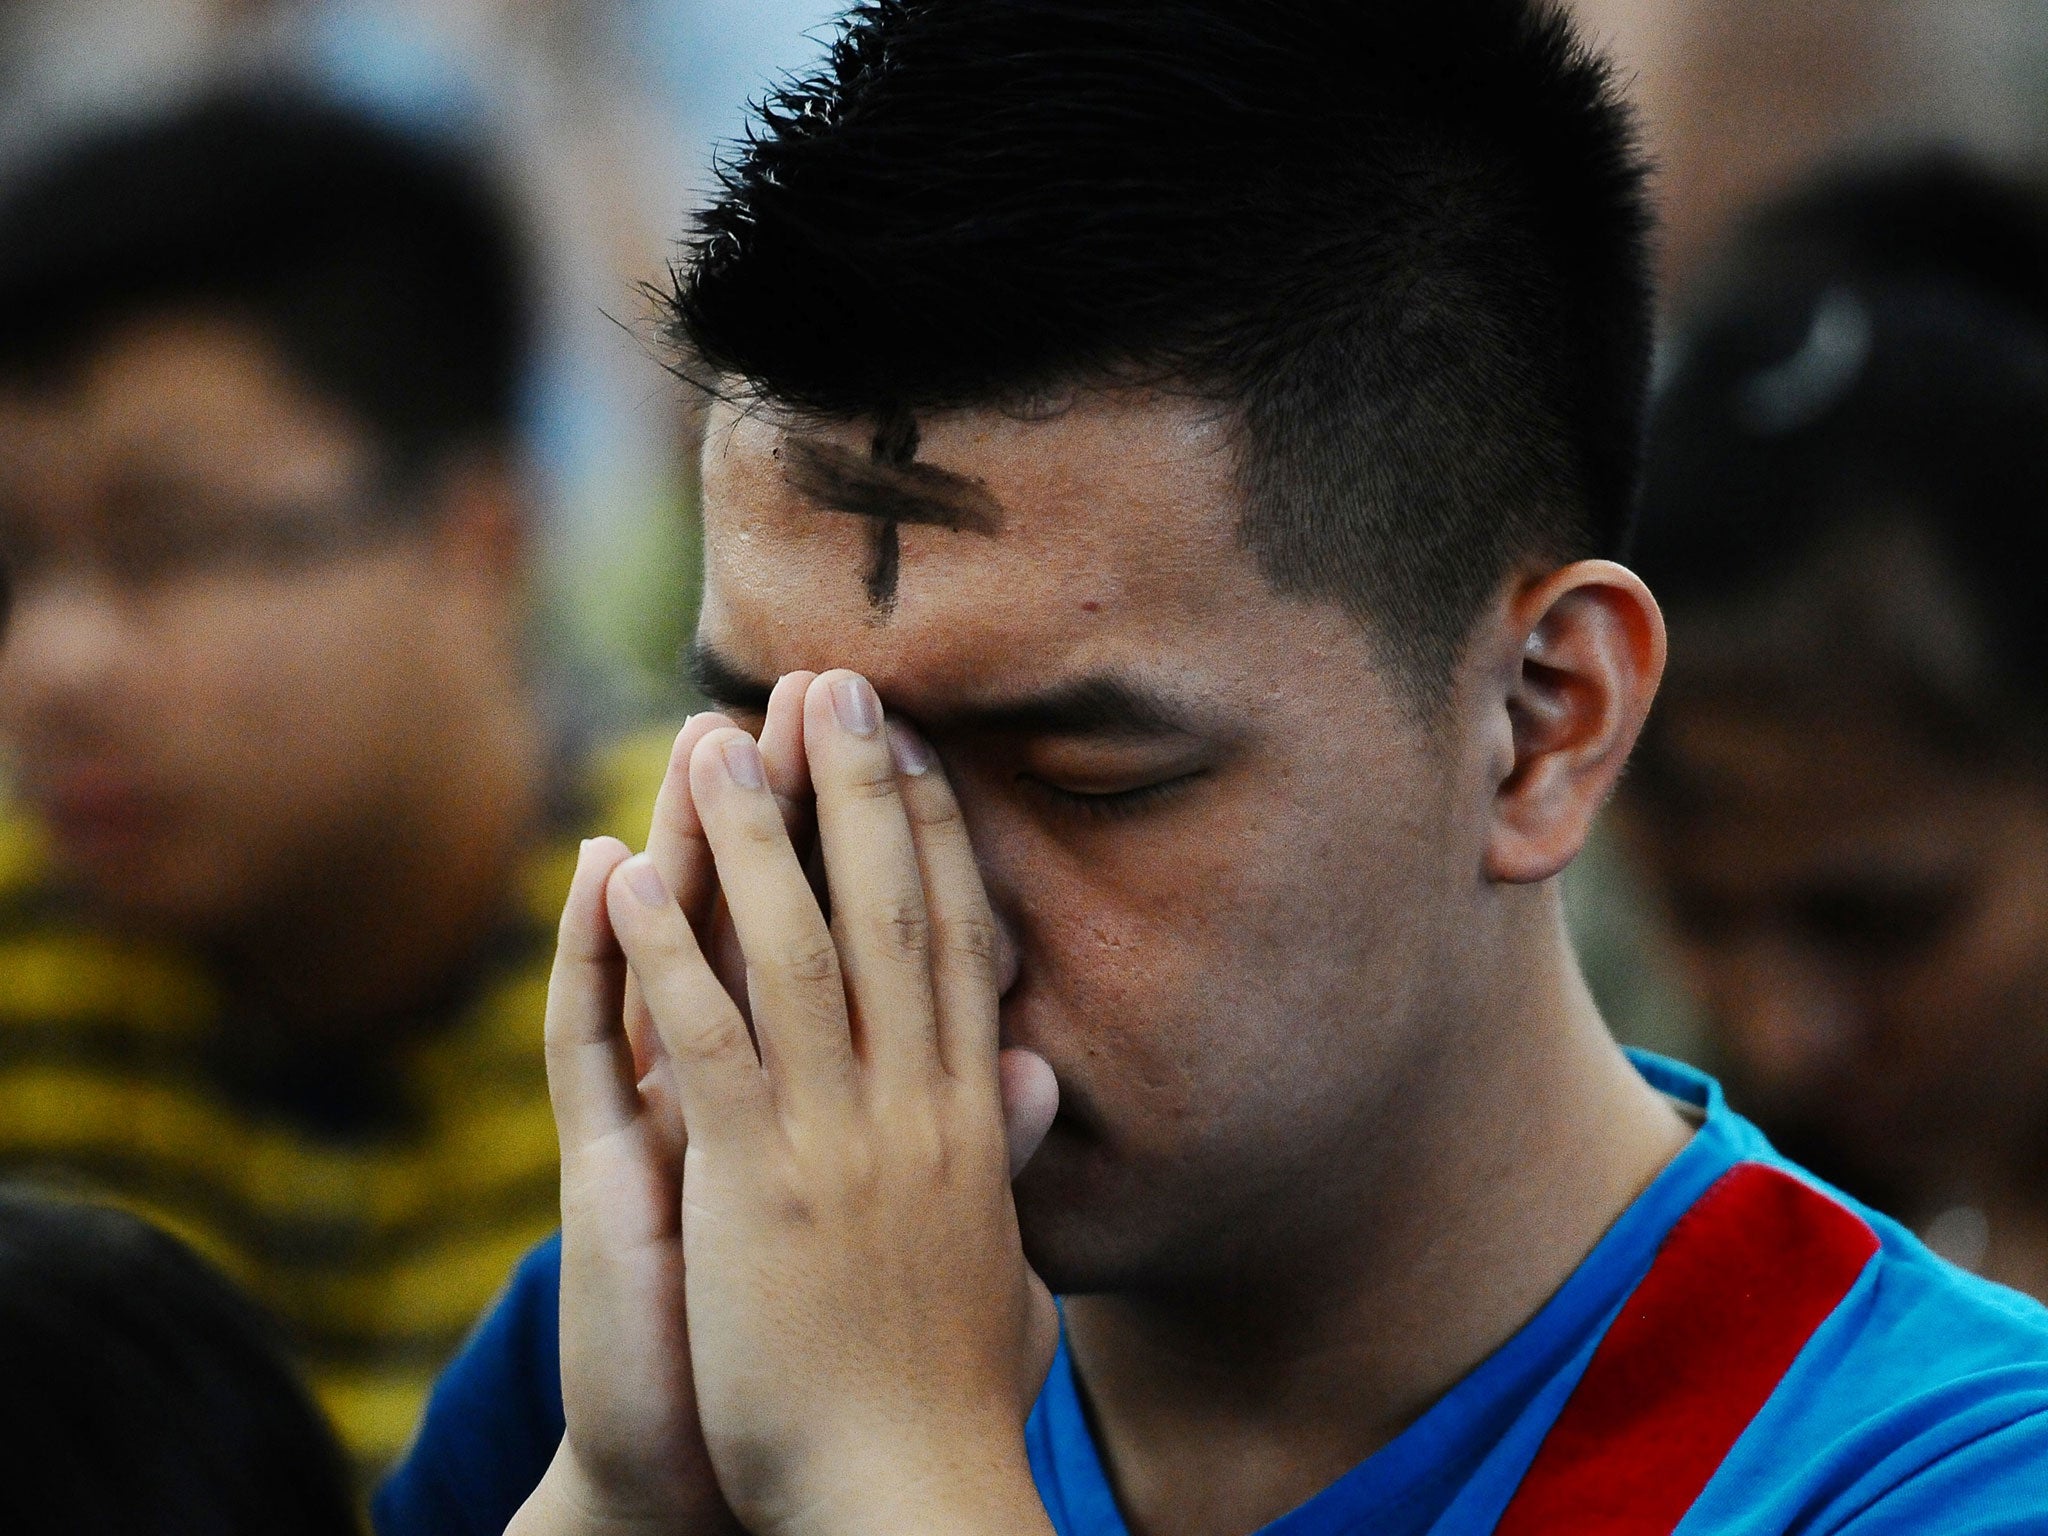 A Catholic man prays during the Ash Wednesday ceremony at Roh Kudus Church on March 5, 2014 in Surabaya, Indonesia.